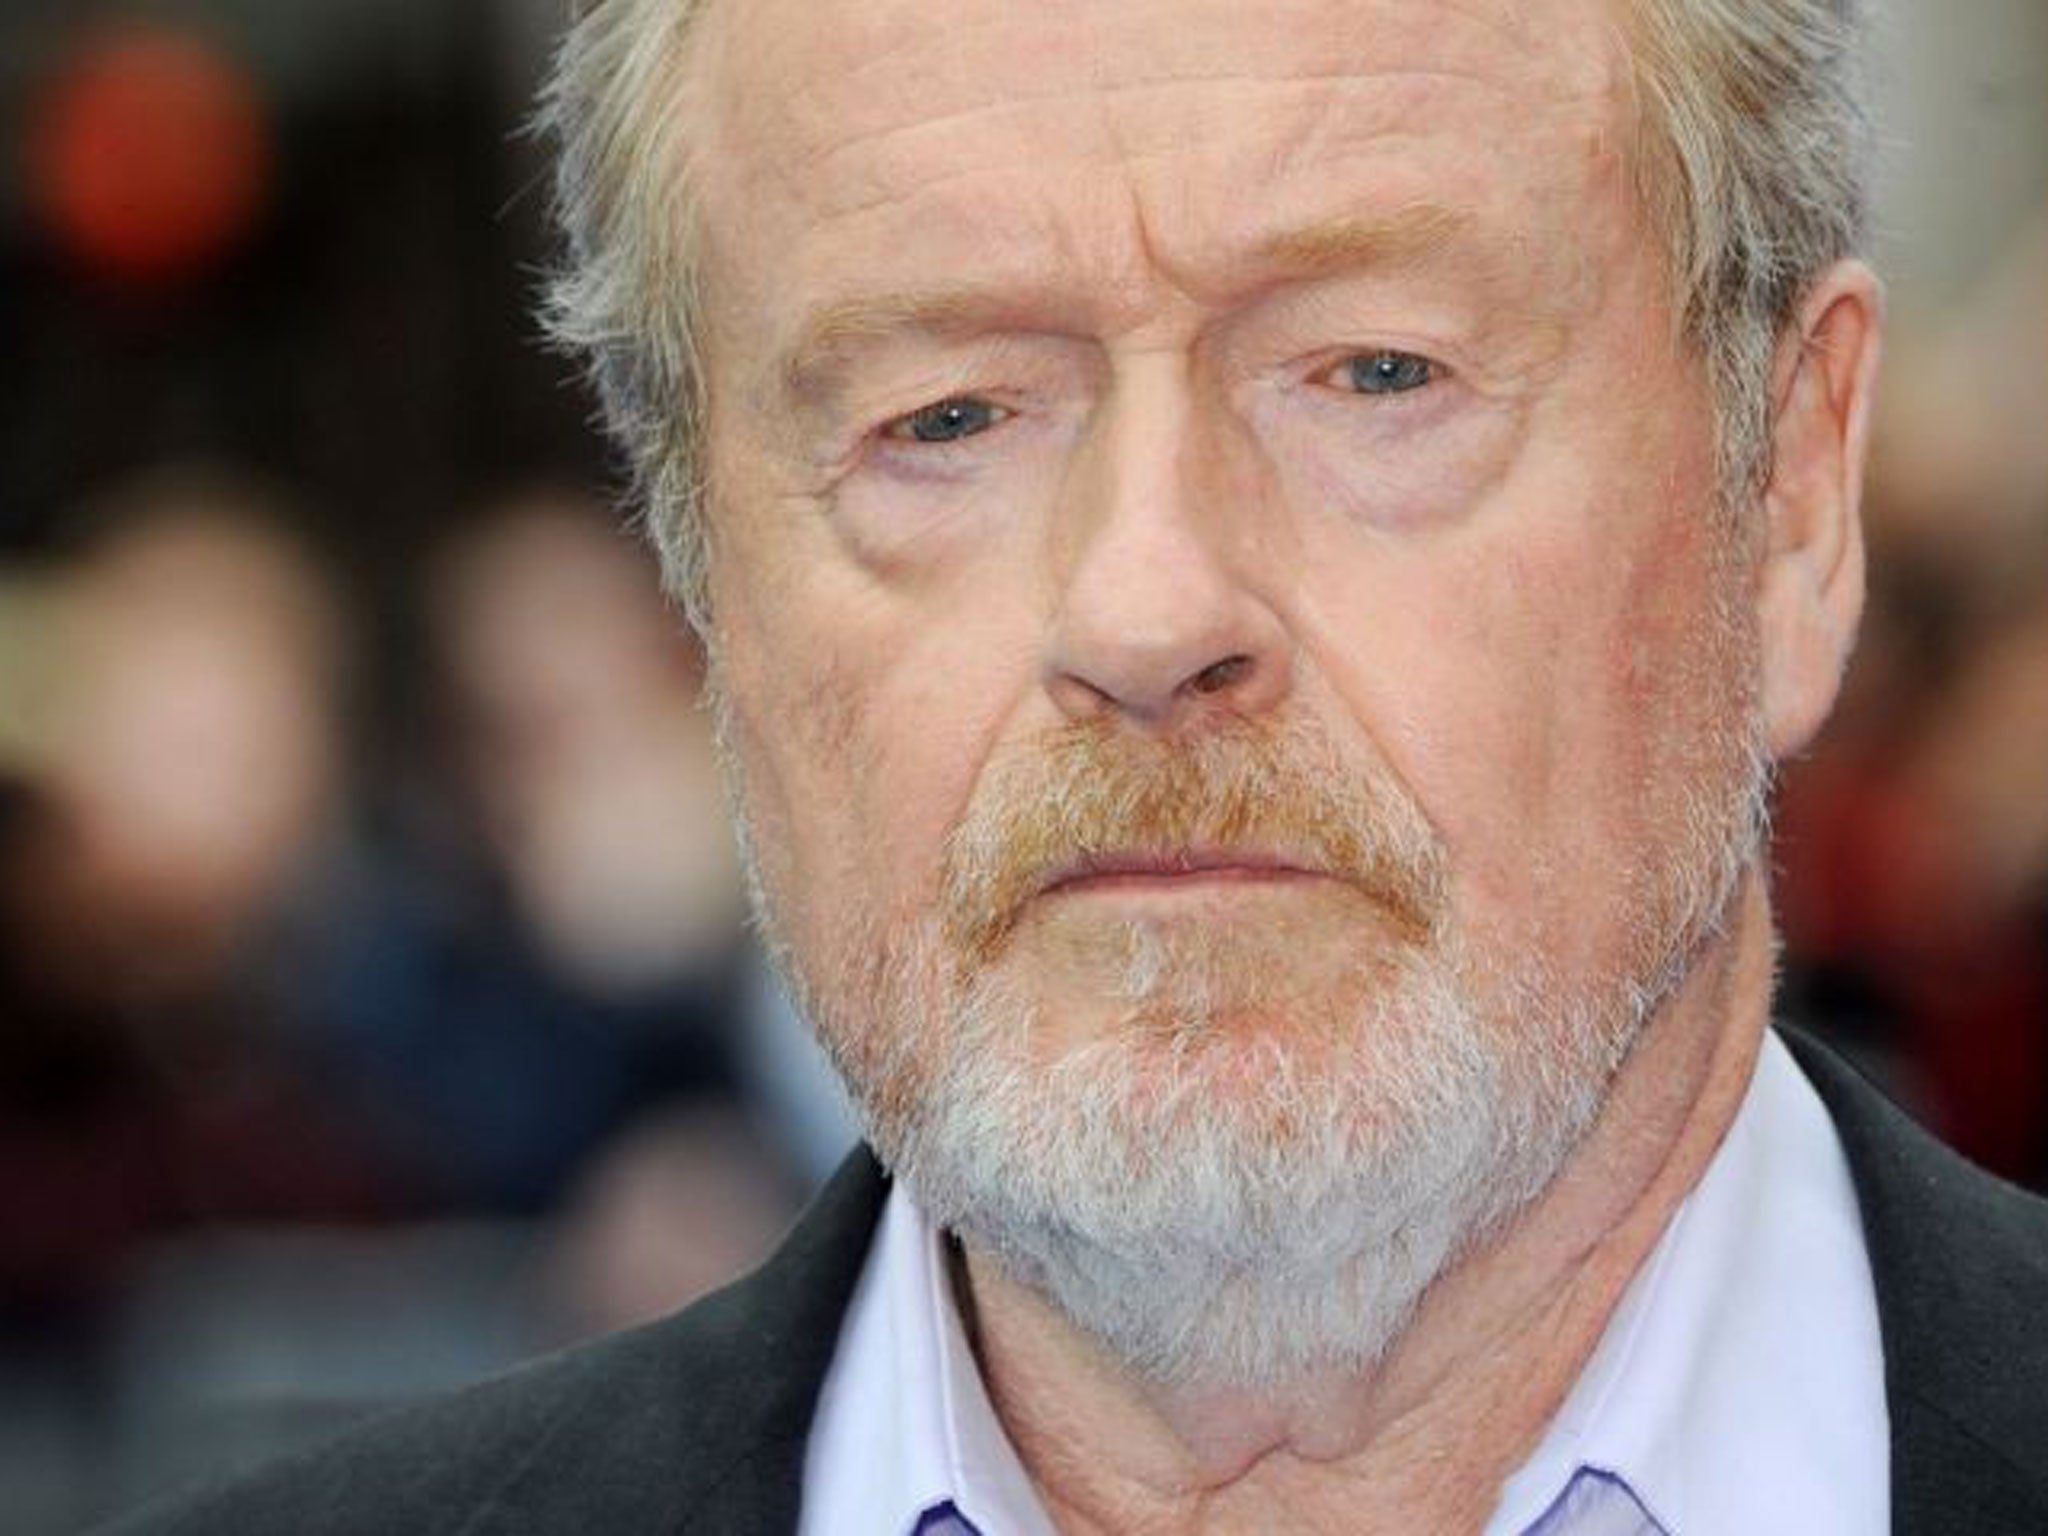 Ridley Scott will produce a film about a government agency of psychic spies